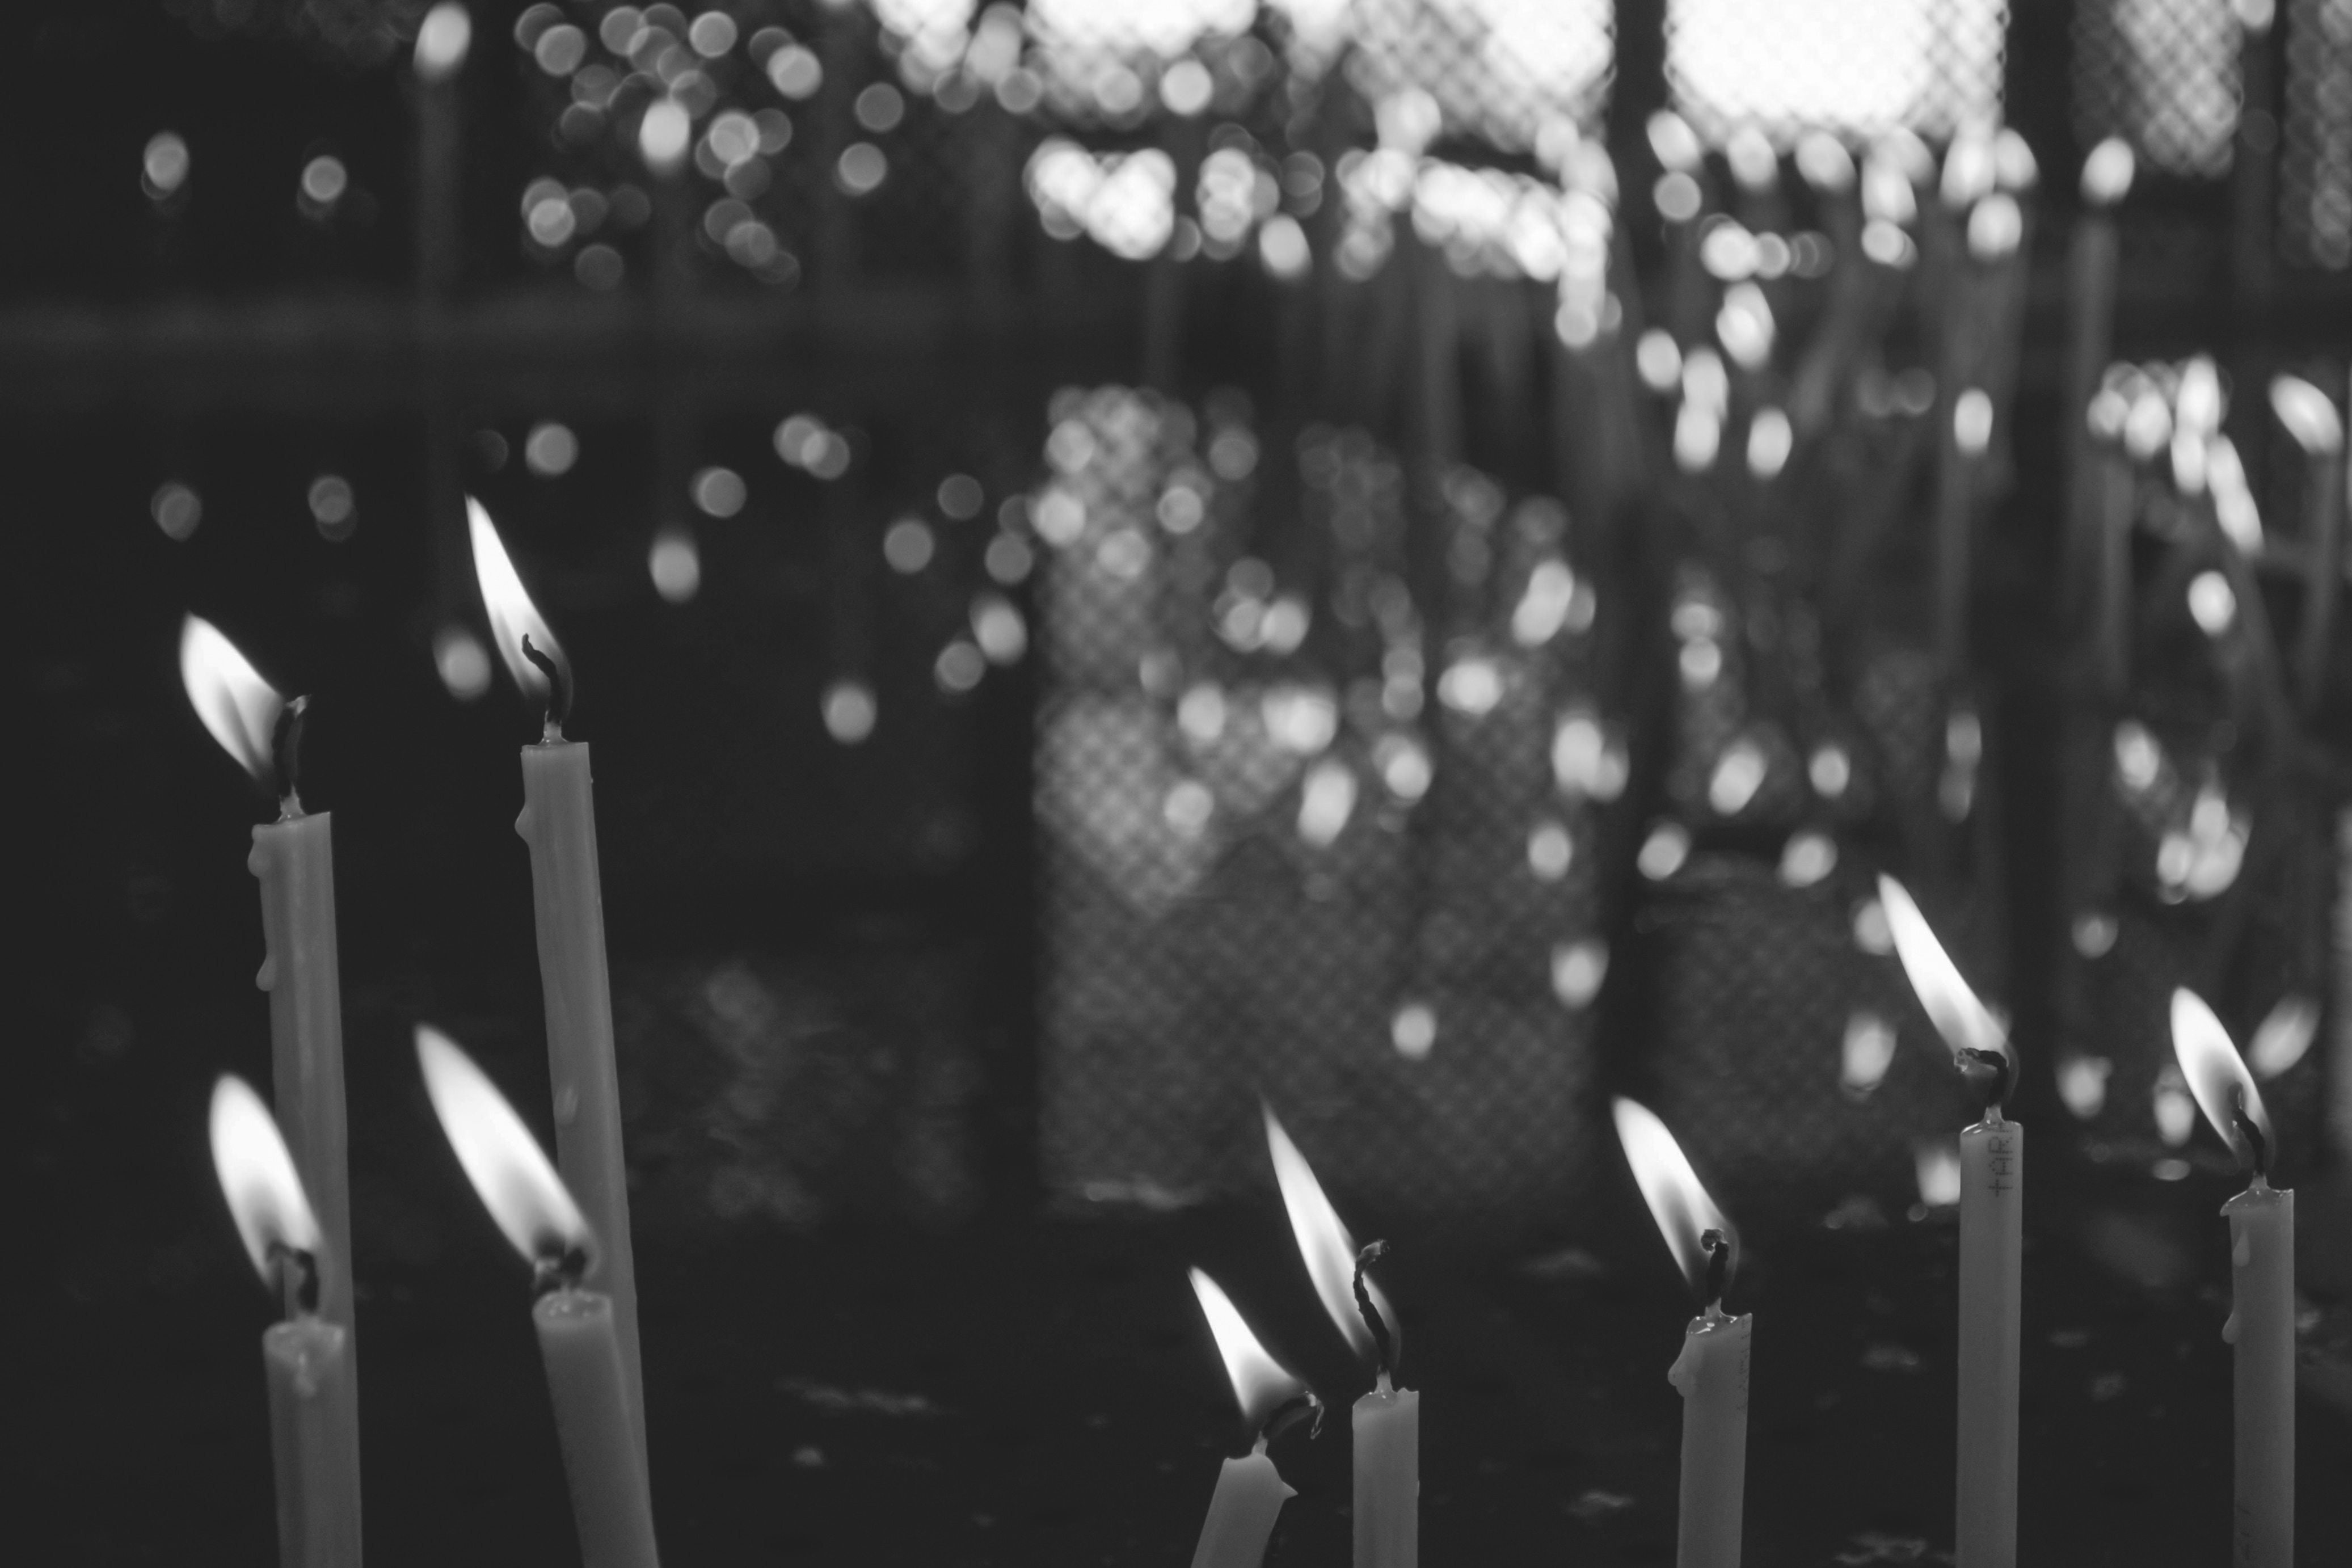 gray scale photography of candles